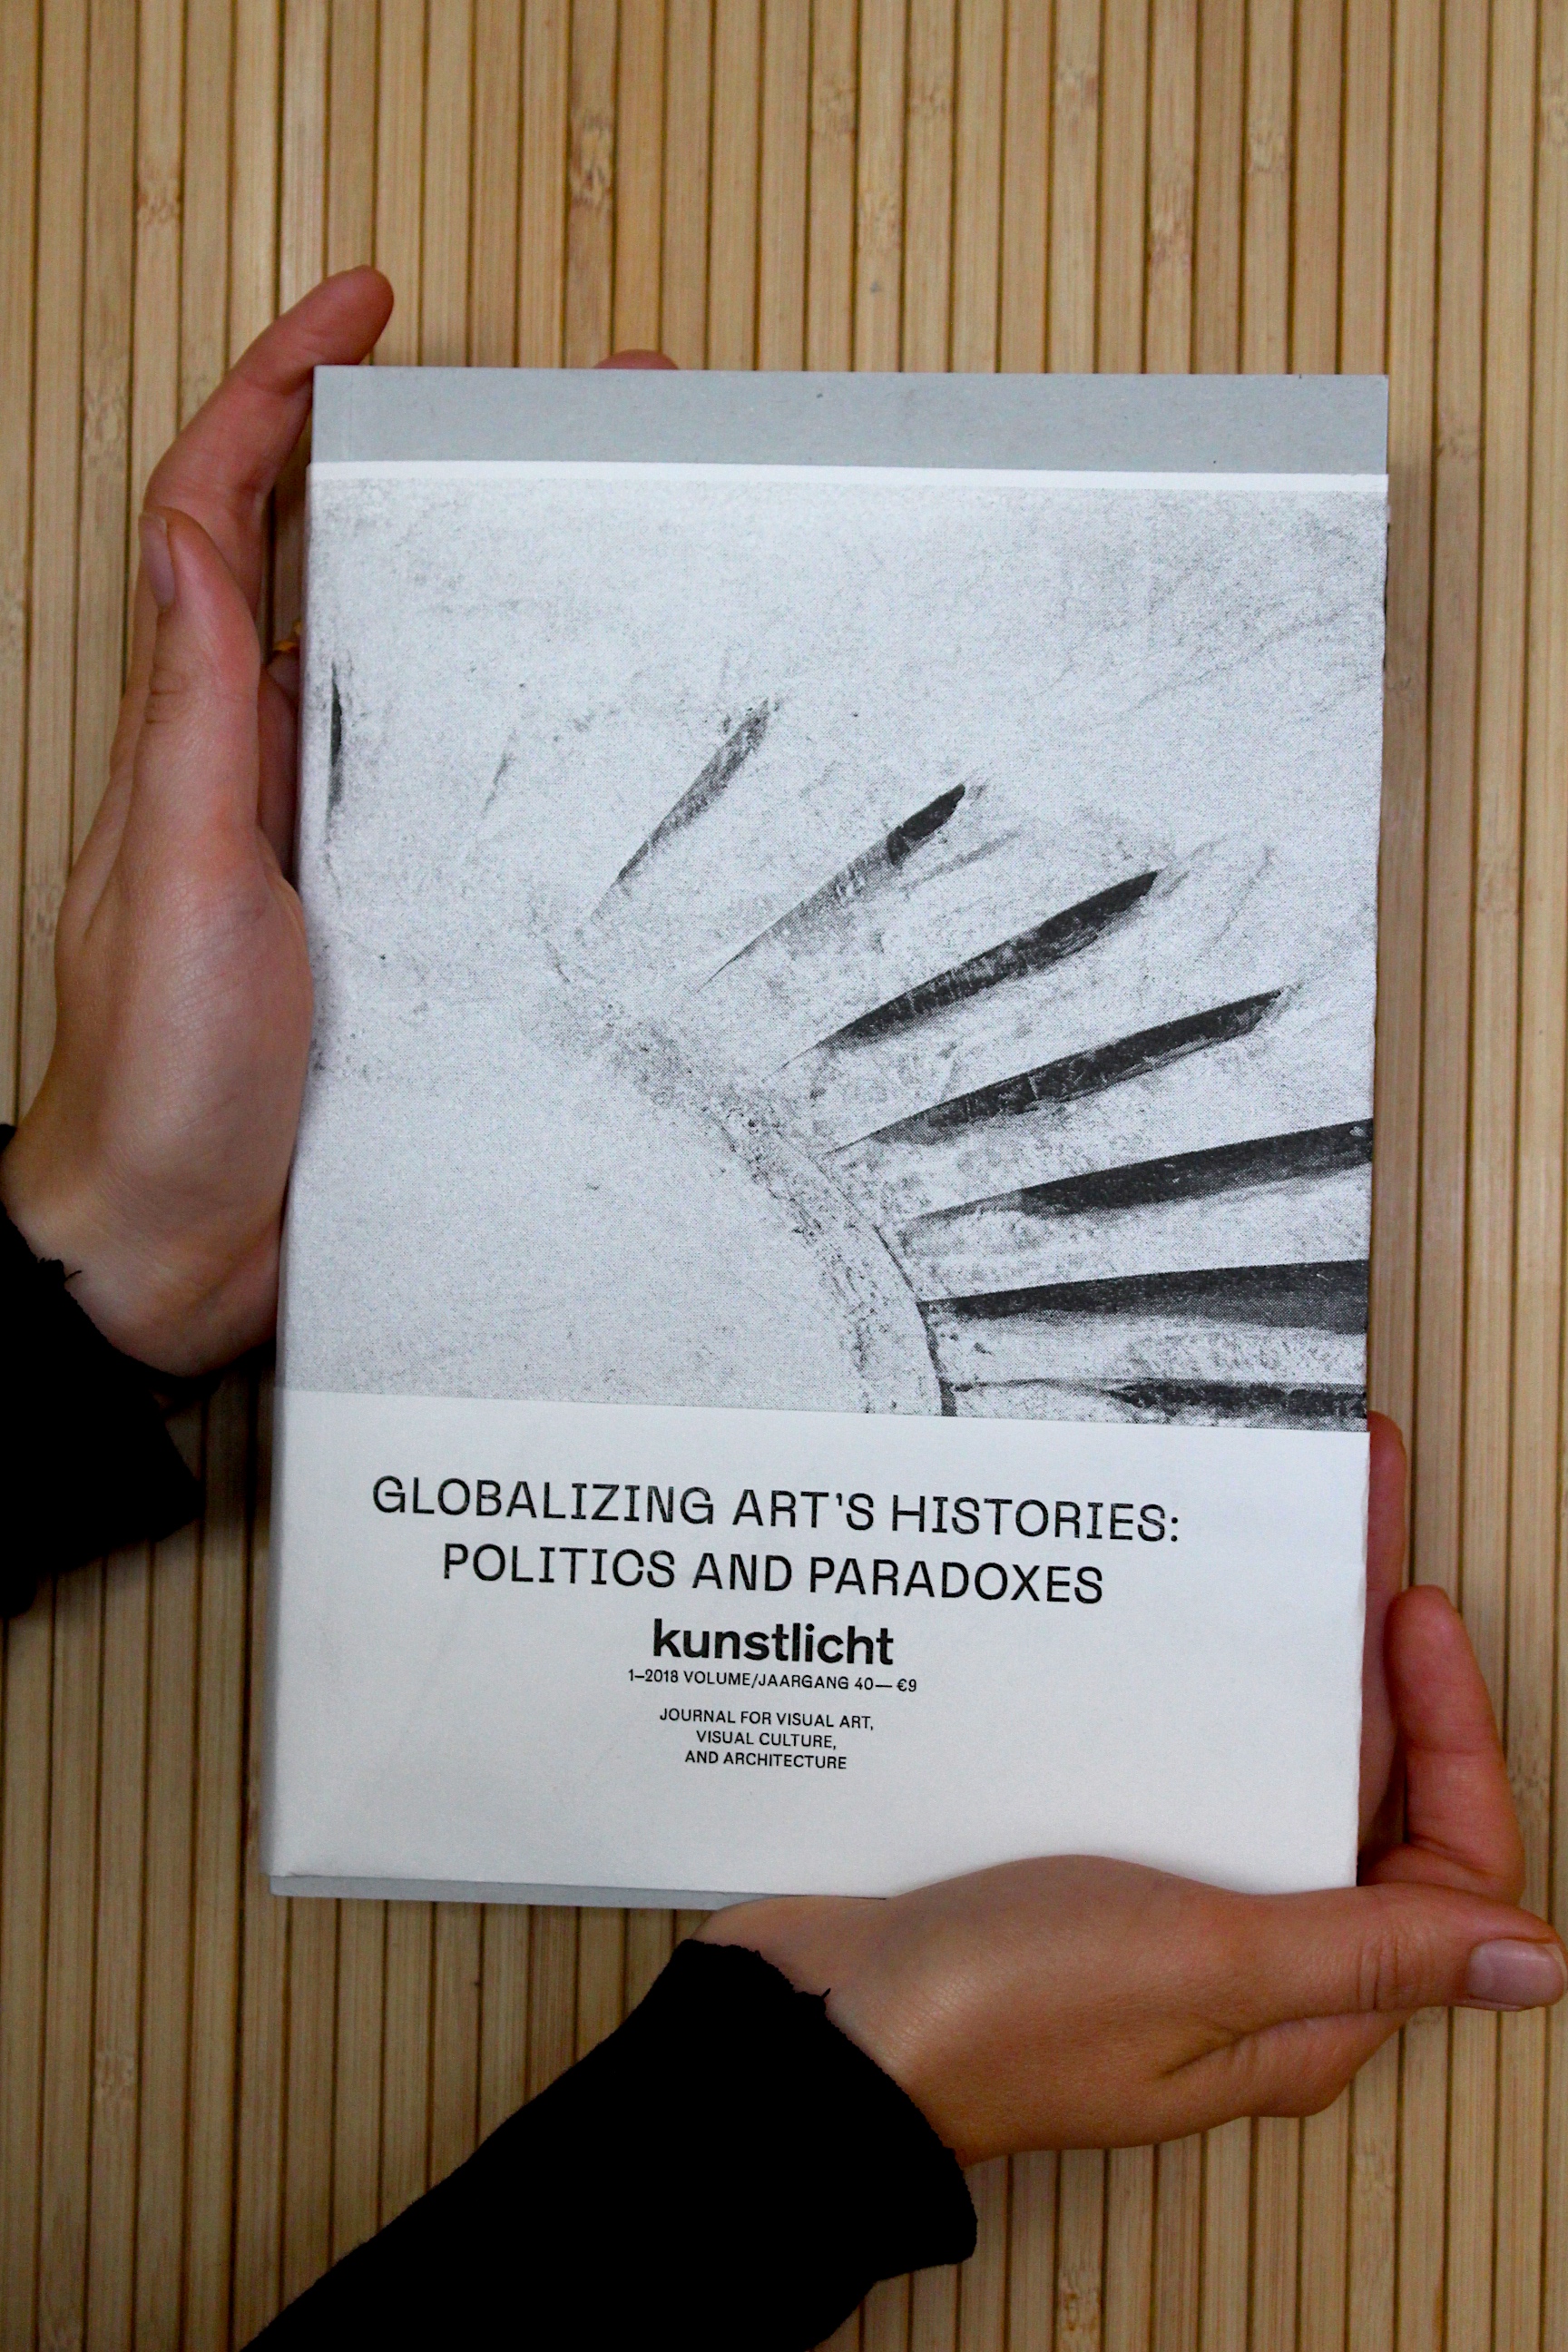 VOL. 39, 2018, NO. 1, GLOBALIZING ART’S HISTORIES: POLITICS AND PARADOXES